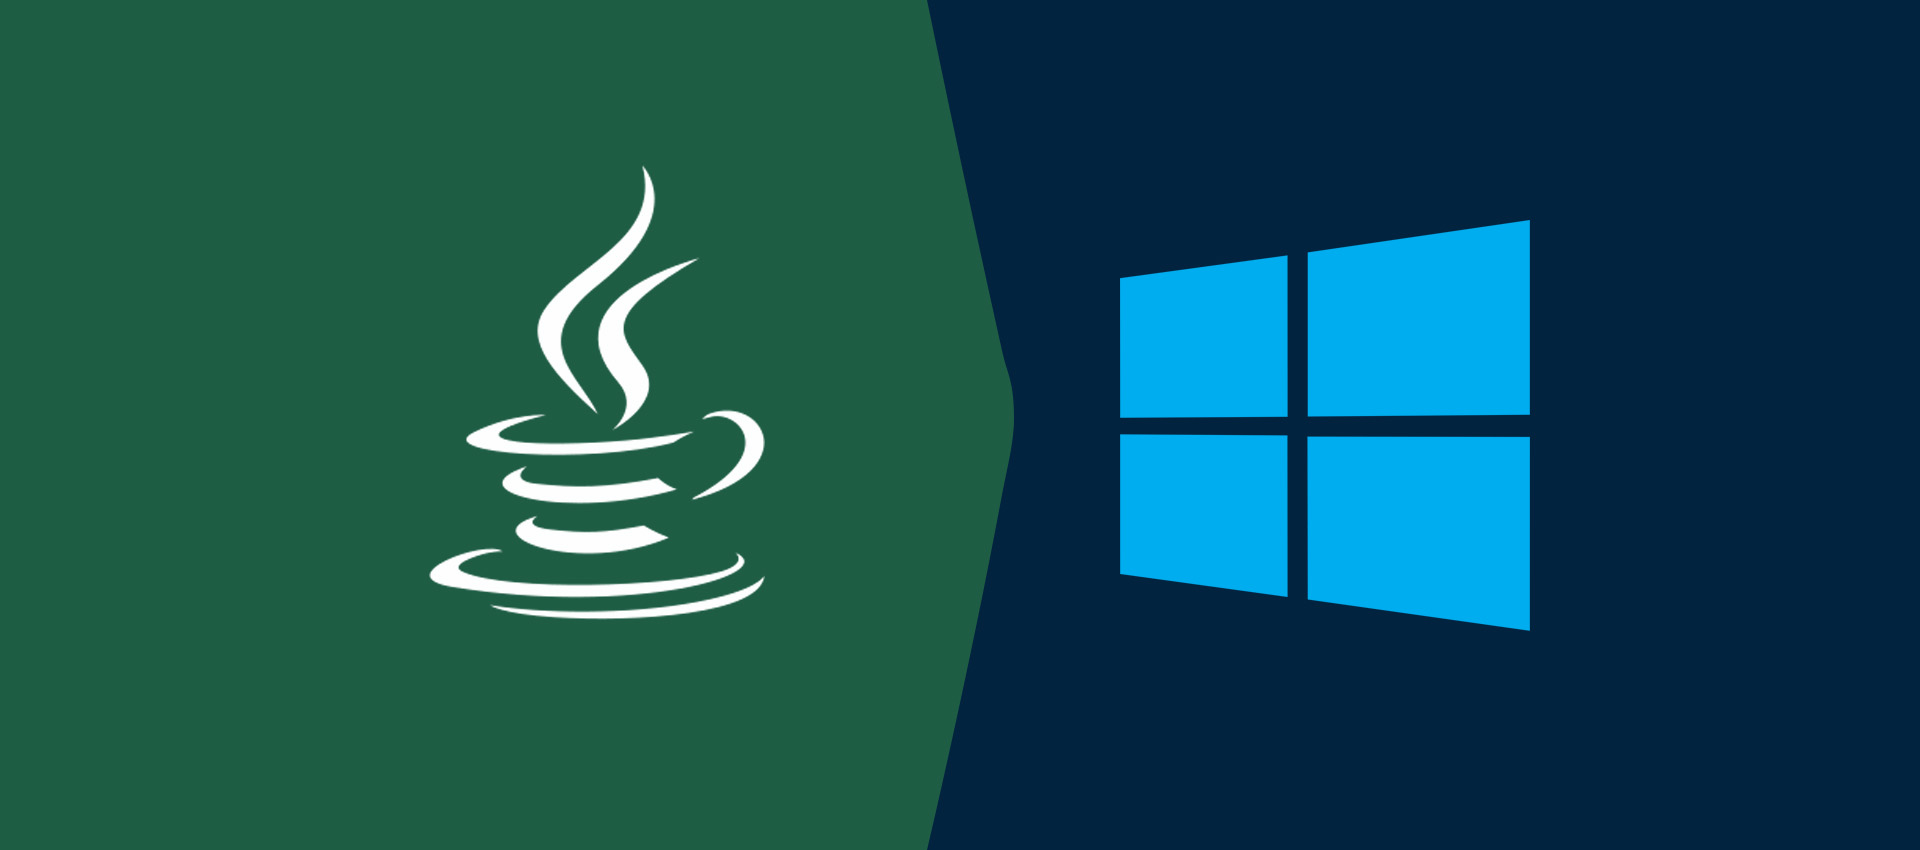 How To Install Java 11 On Windows